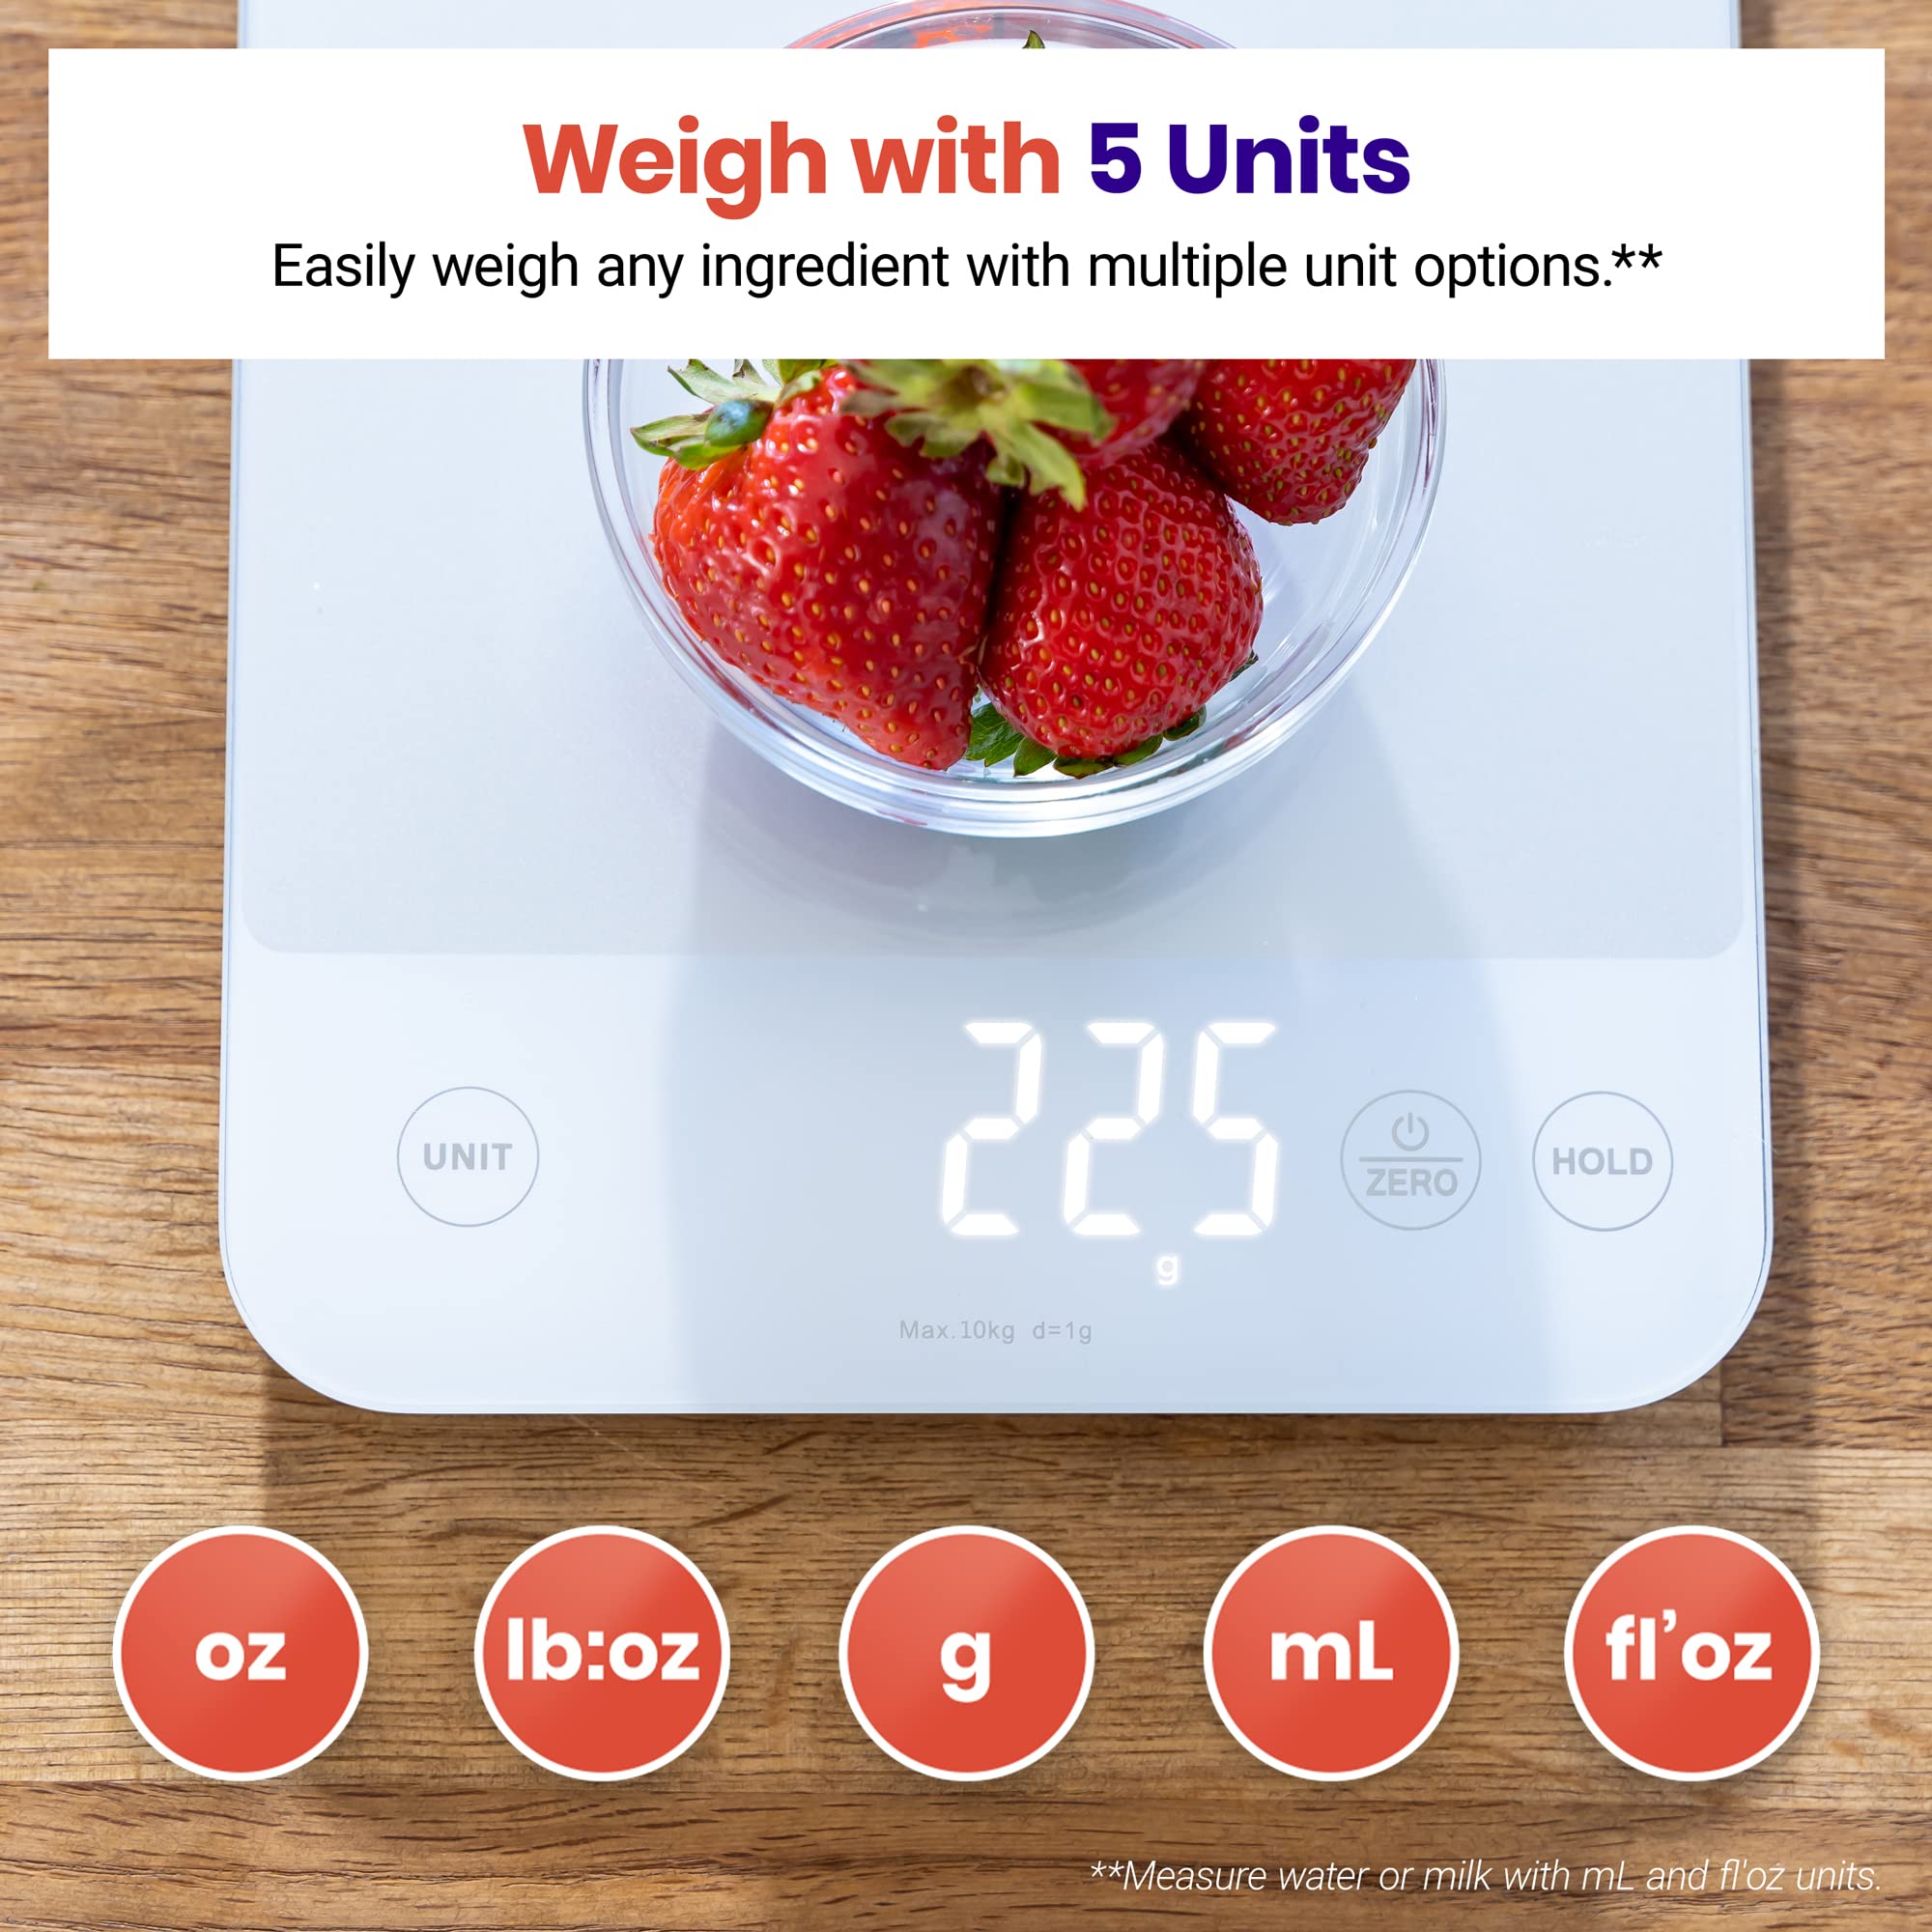 Etekcity Luminary Lite 22lb Food Kitchen Digital Scale, IPX6 Waterproof, Rechargeable, Ounces and Grams for Weight Loss, Cooking, Baking, 0.05oz/1g Precise Graduation, Silver White